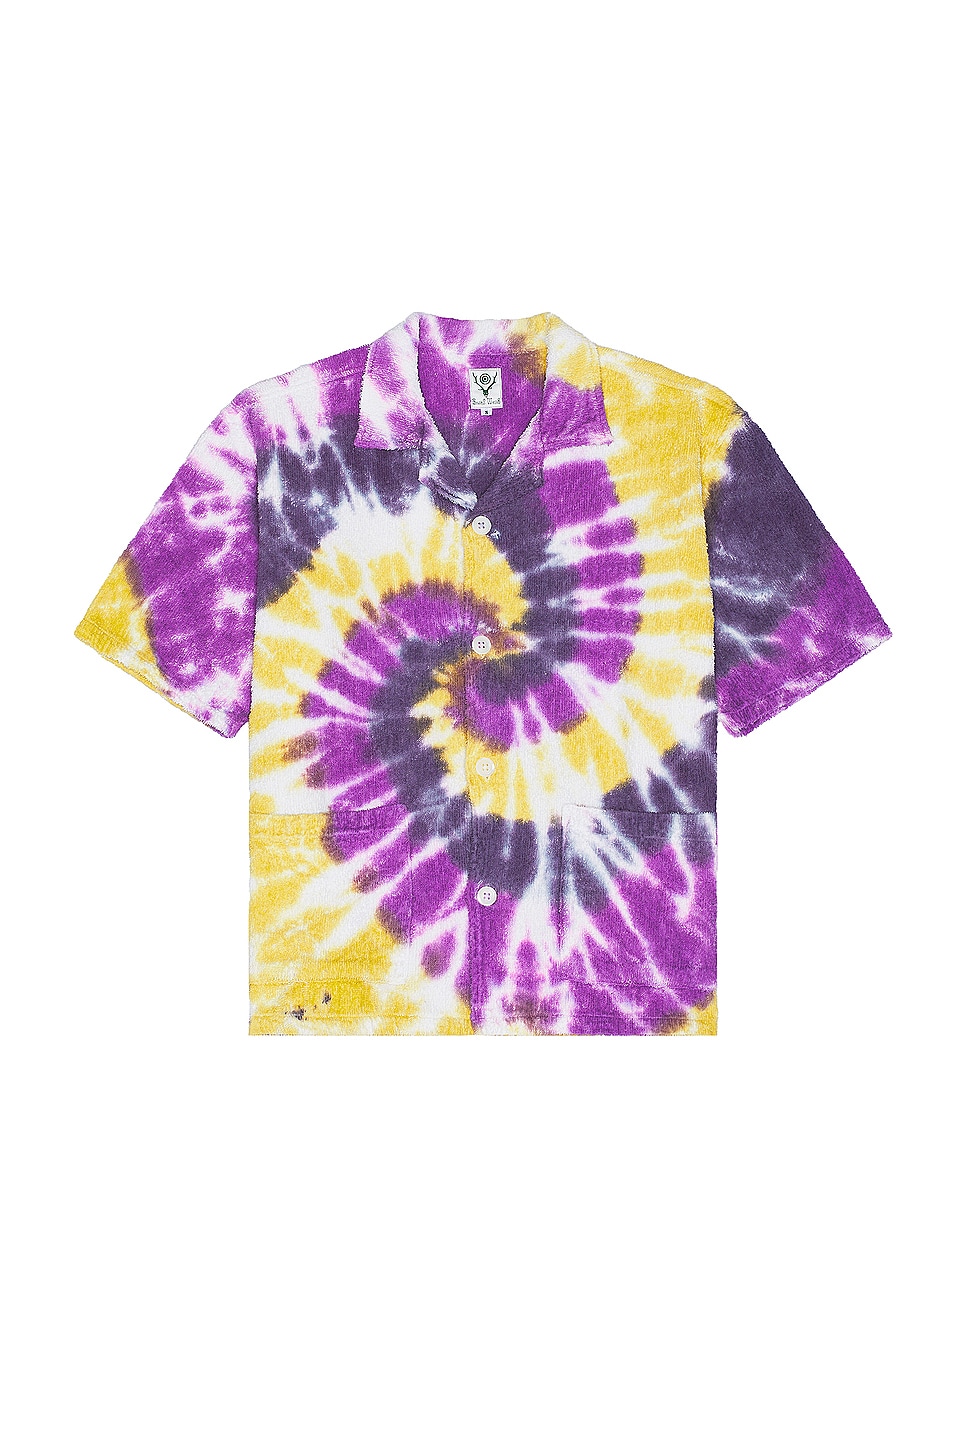 Image 1 of South2 West8 Cabana Shirt Cotton Pile Tie Dye in B-Yellow & Purple